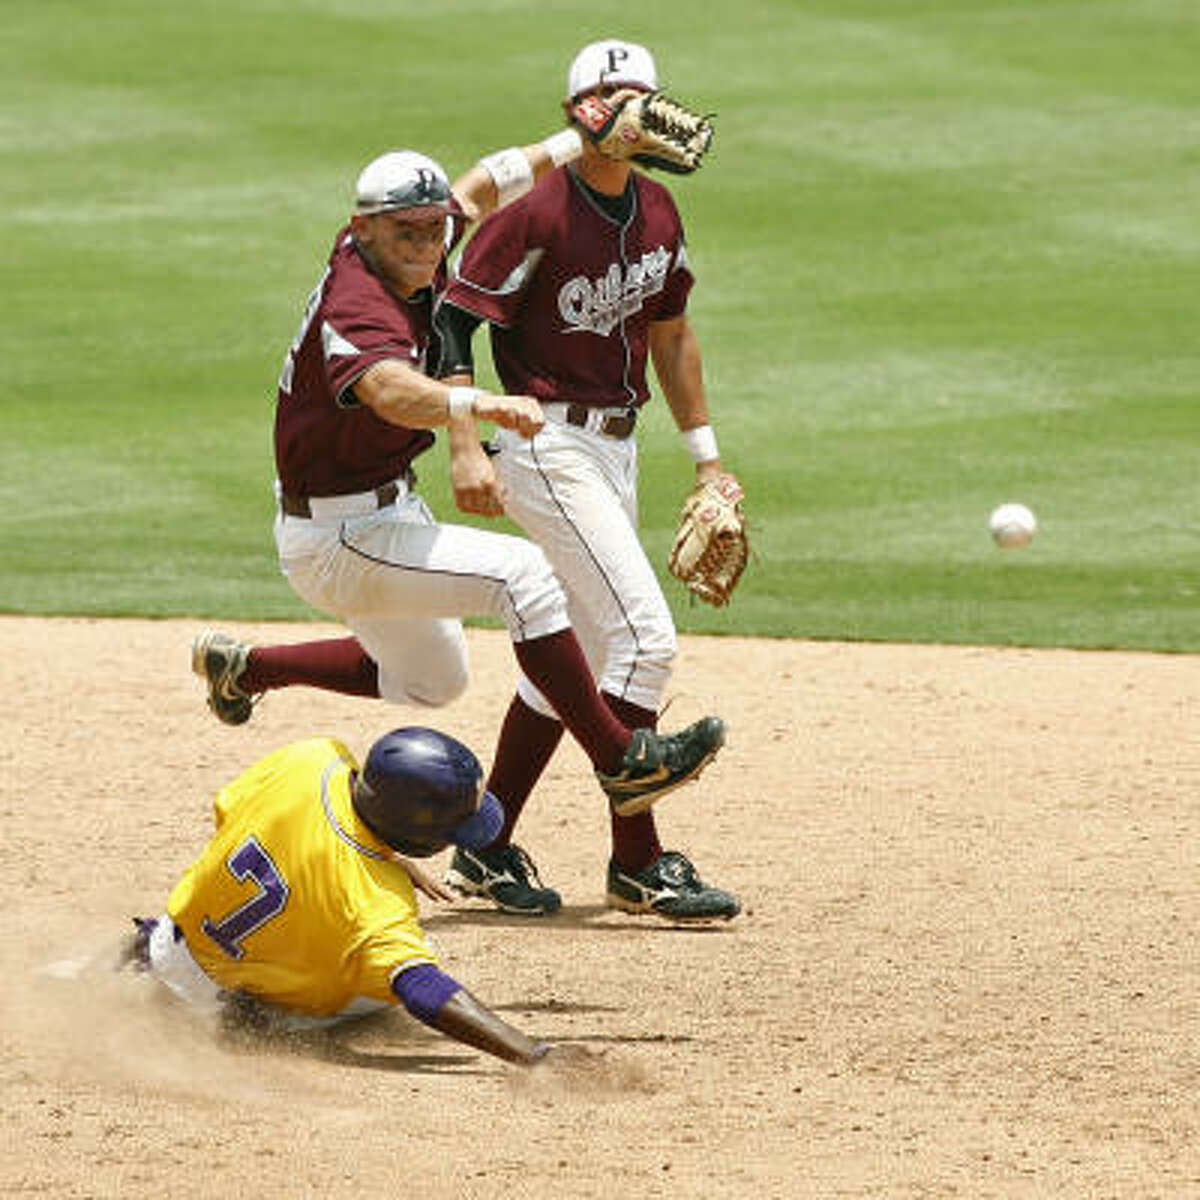 Pearland short stop Josh Gonzales (12) attempts a double play over Lufkin player Carrington Byndon (7) in the UIL 5A state baseball semifinal in Round Rock.